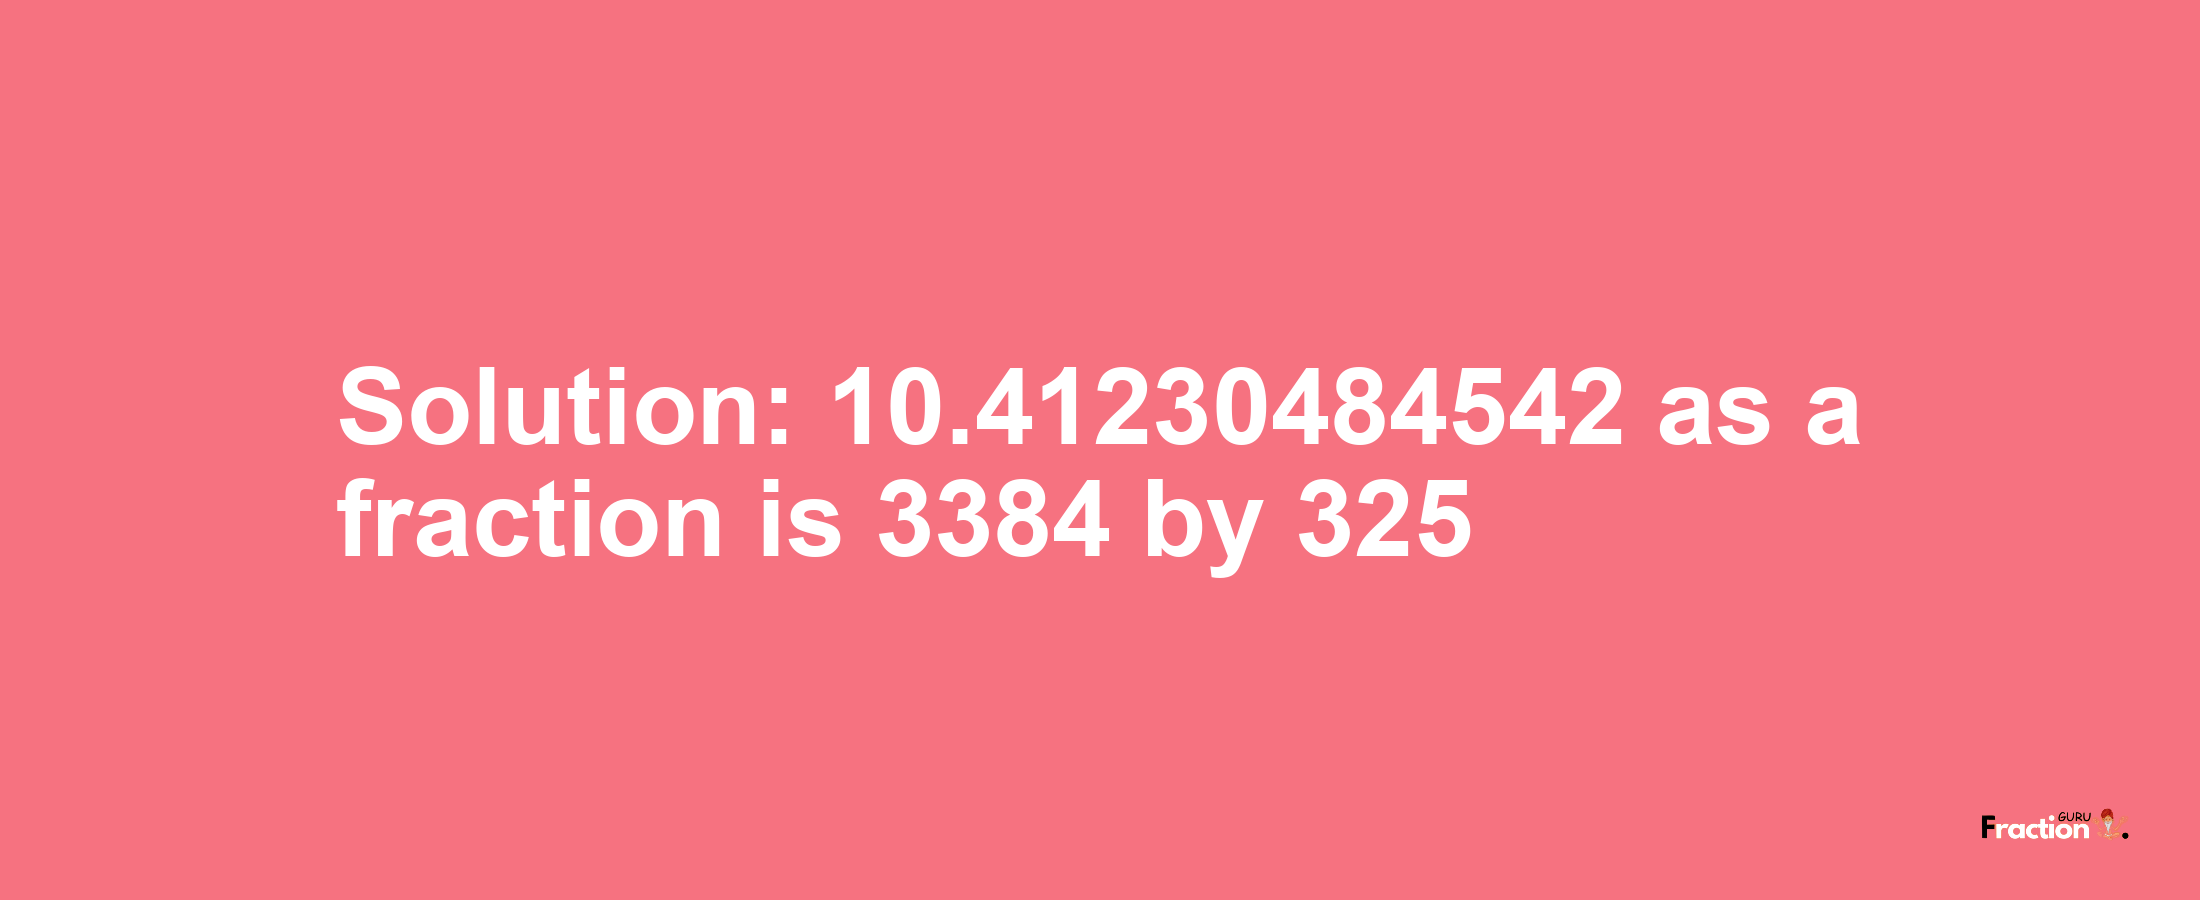 Solution:10.41230484542 as a fraction is 3384/325